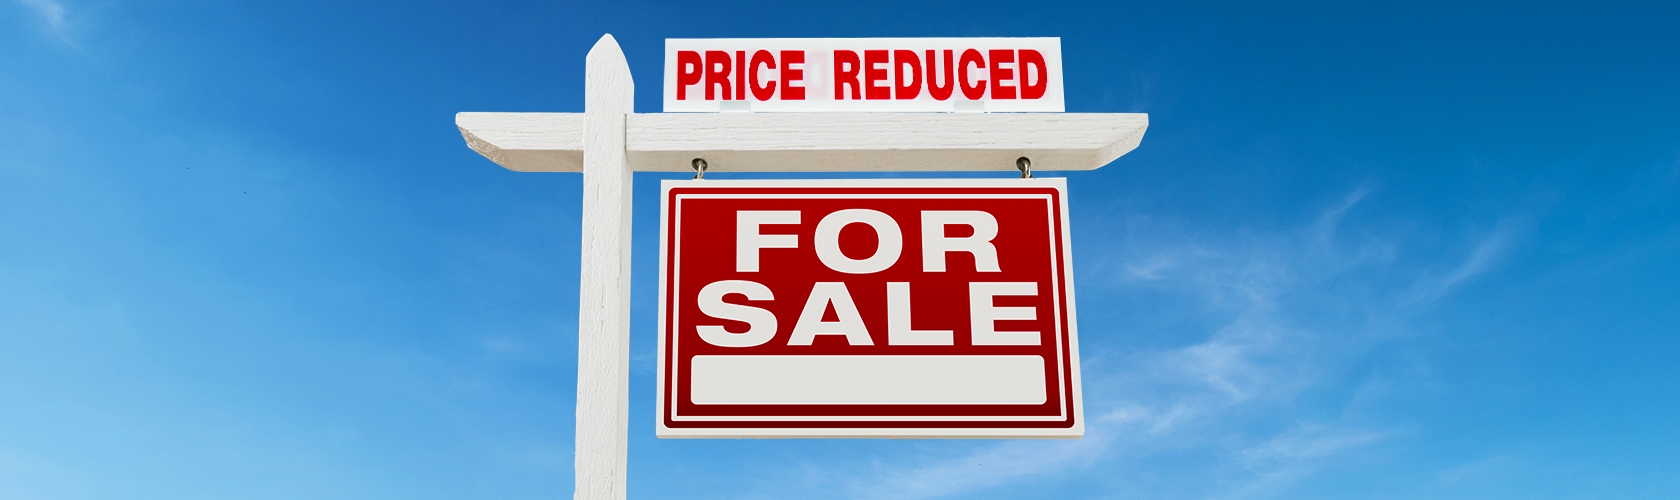 For sale sign with Price Reduced